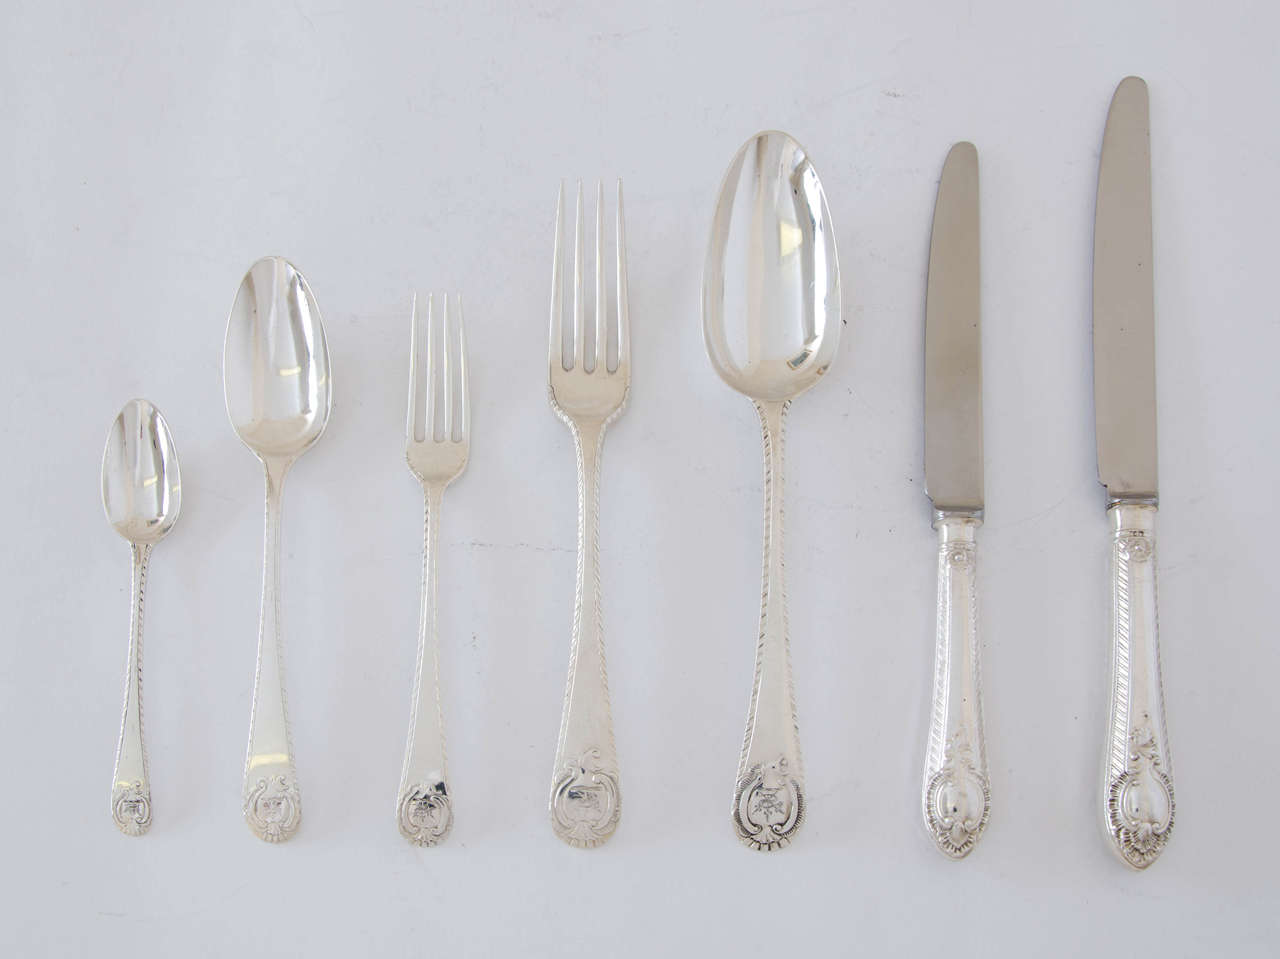 Antique Silver Service of Flatware , Extremely Rare Eighteenth Century Feather Edge and Cartouche Carrington Shield Pattern” All engraved with a family crest.
All Made in 1778-1780 in London
6 Tablespoons & 2 Dessert Spoons 1763)
 Comprising:
12